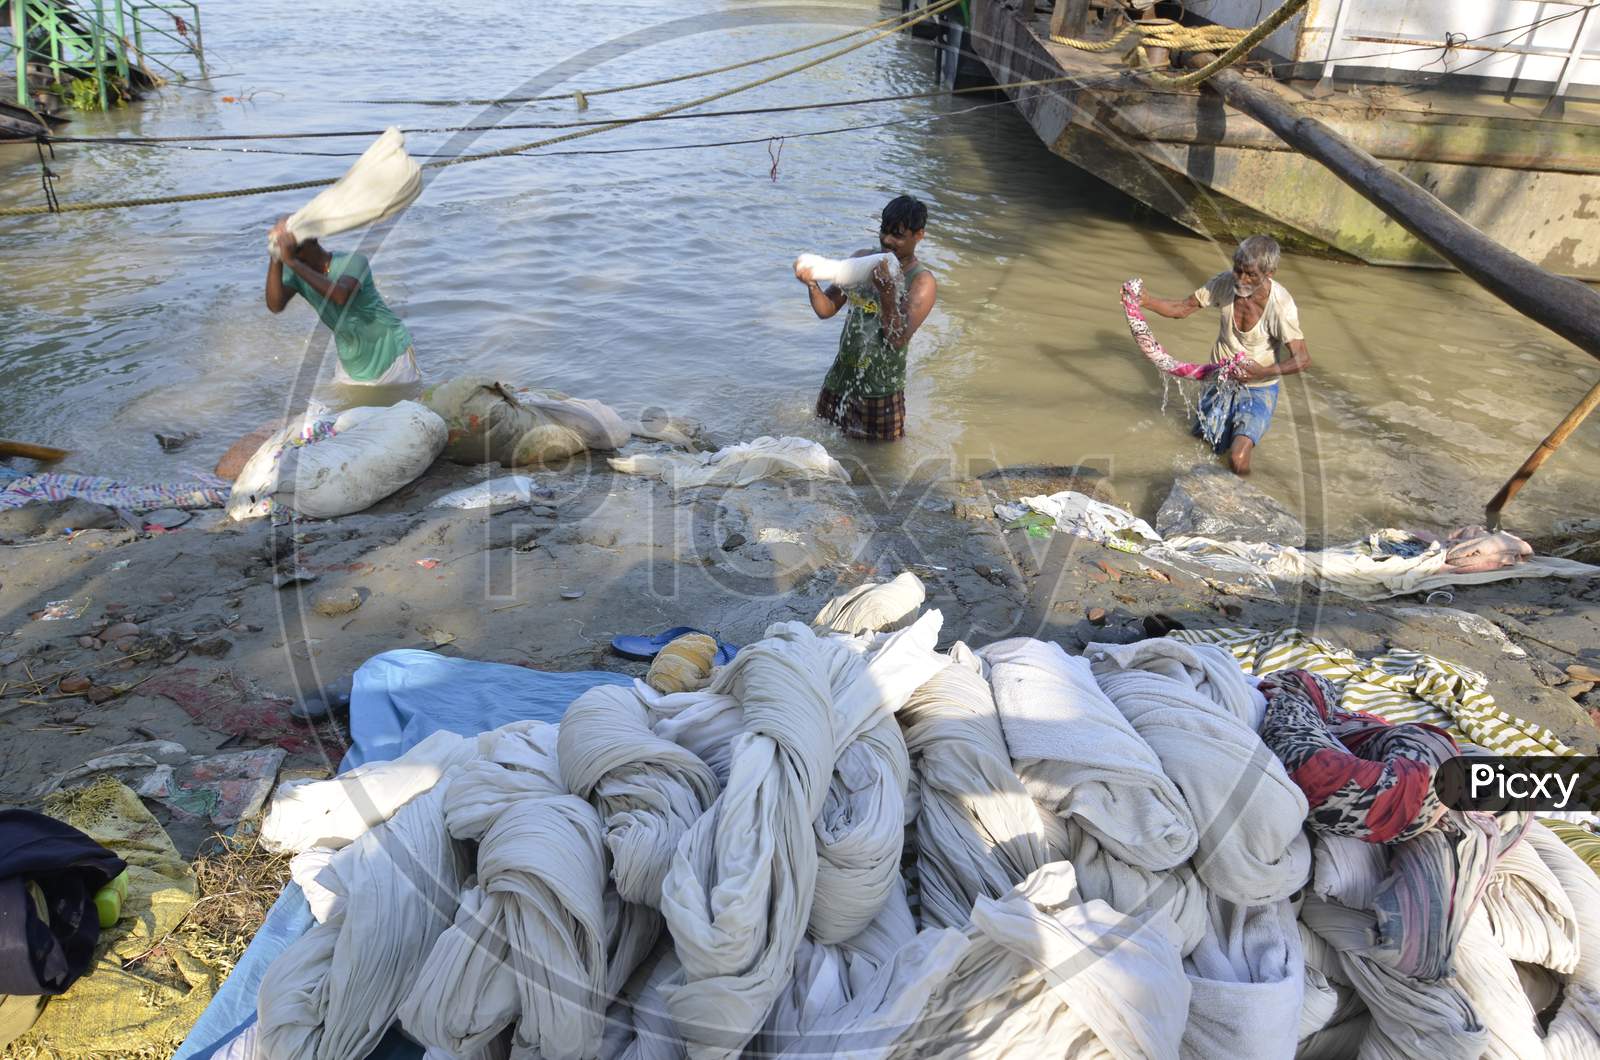 Indian Washerman or Dhobi Washing Clothes on A River Bank